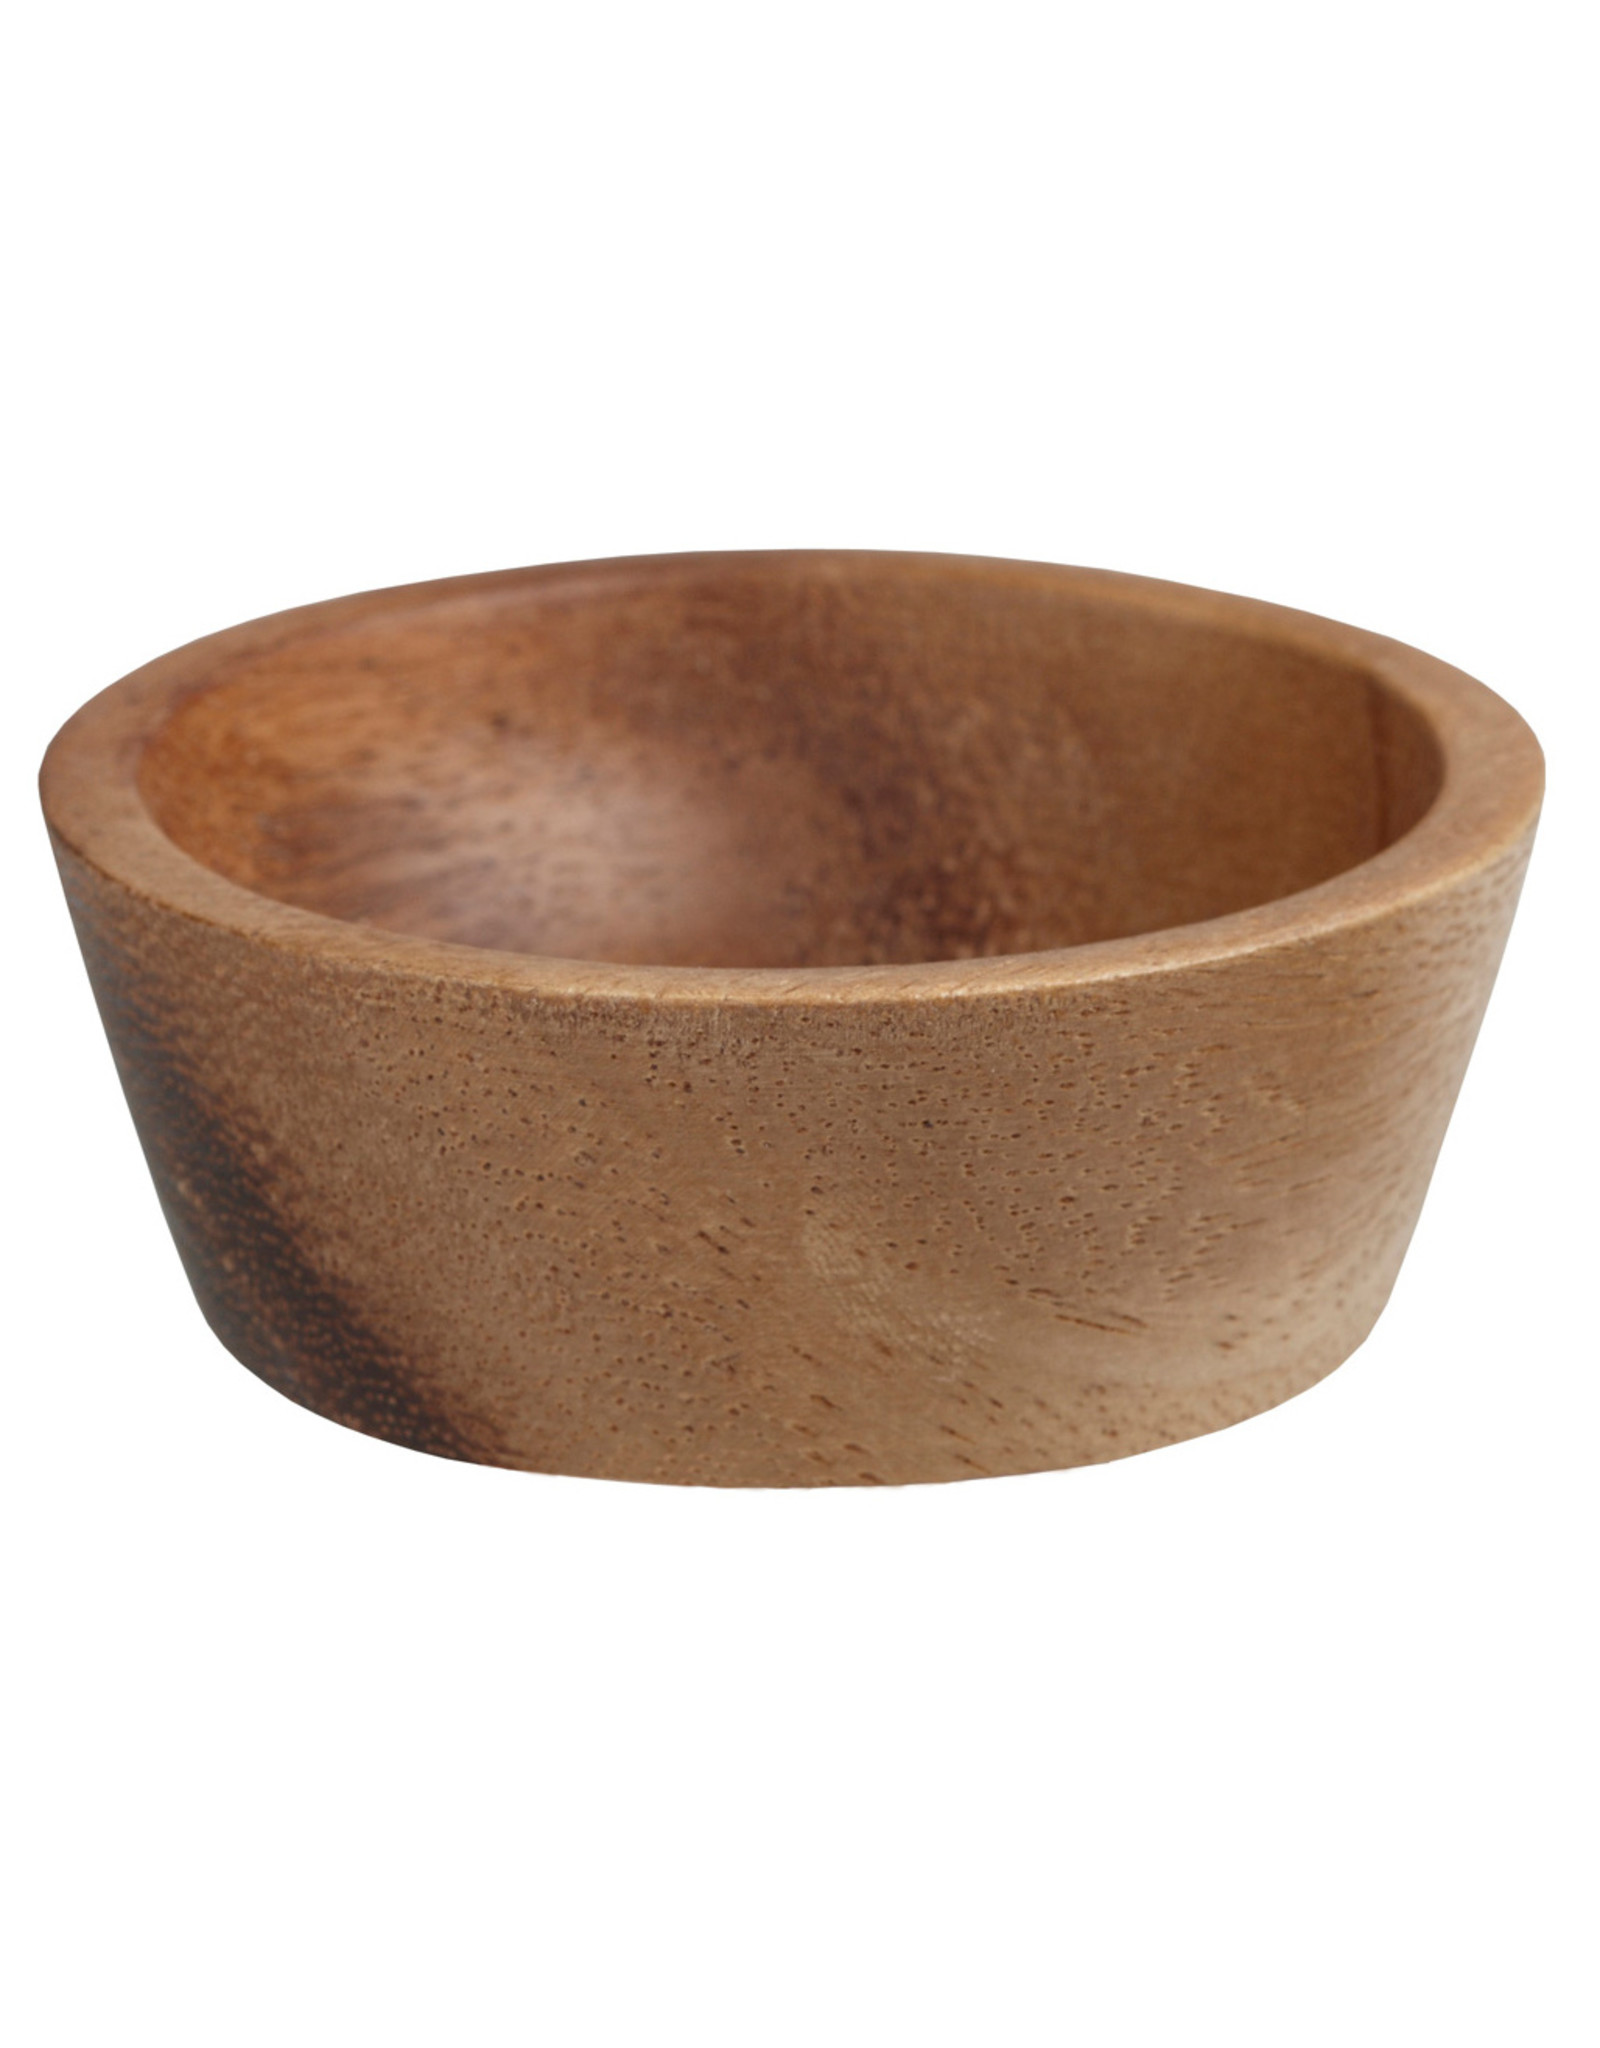 Stylepoint Conical bowl acacia 7 x 2,5 cm